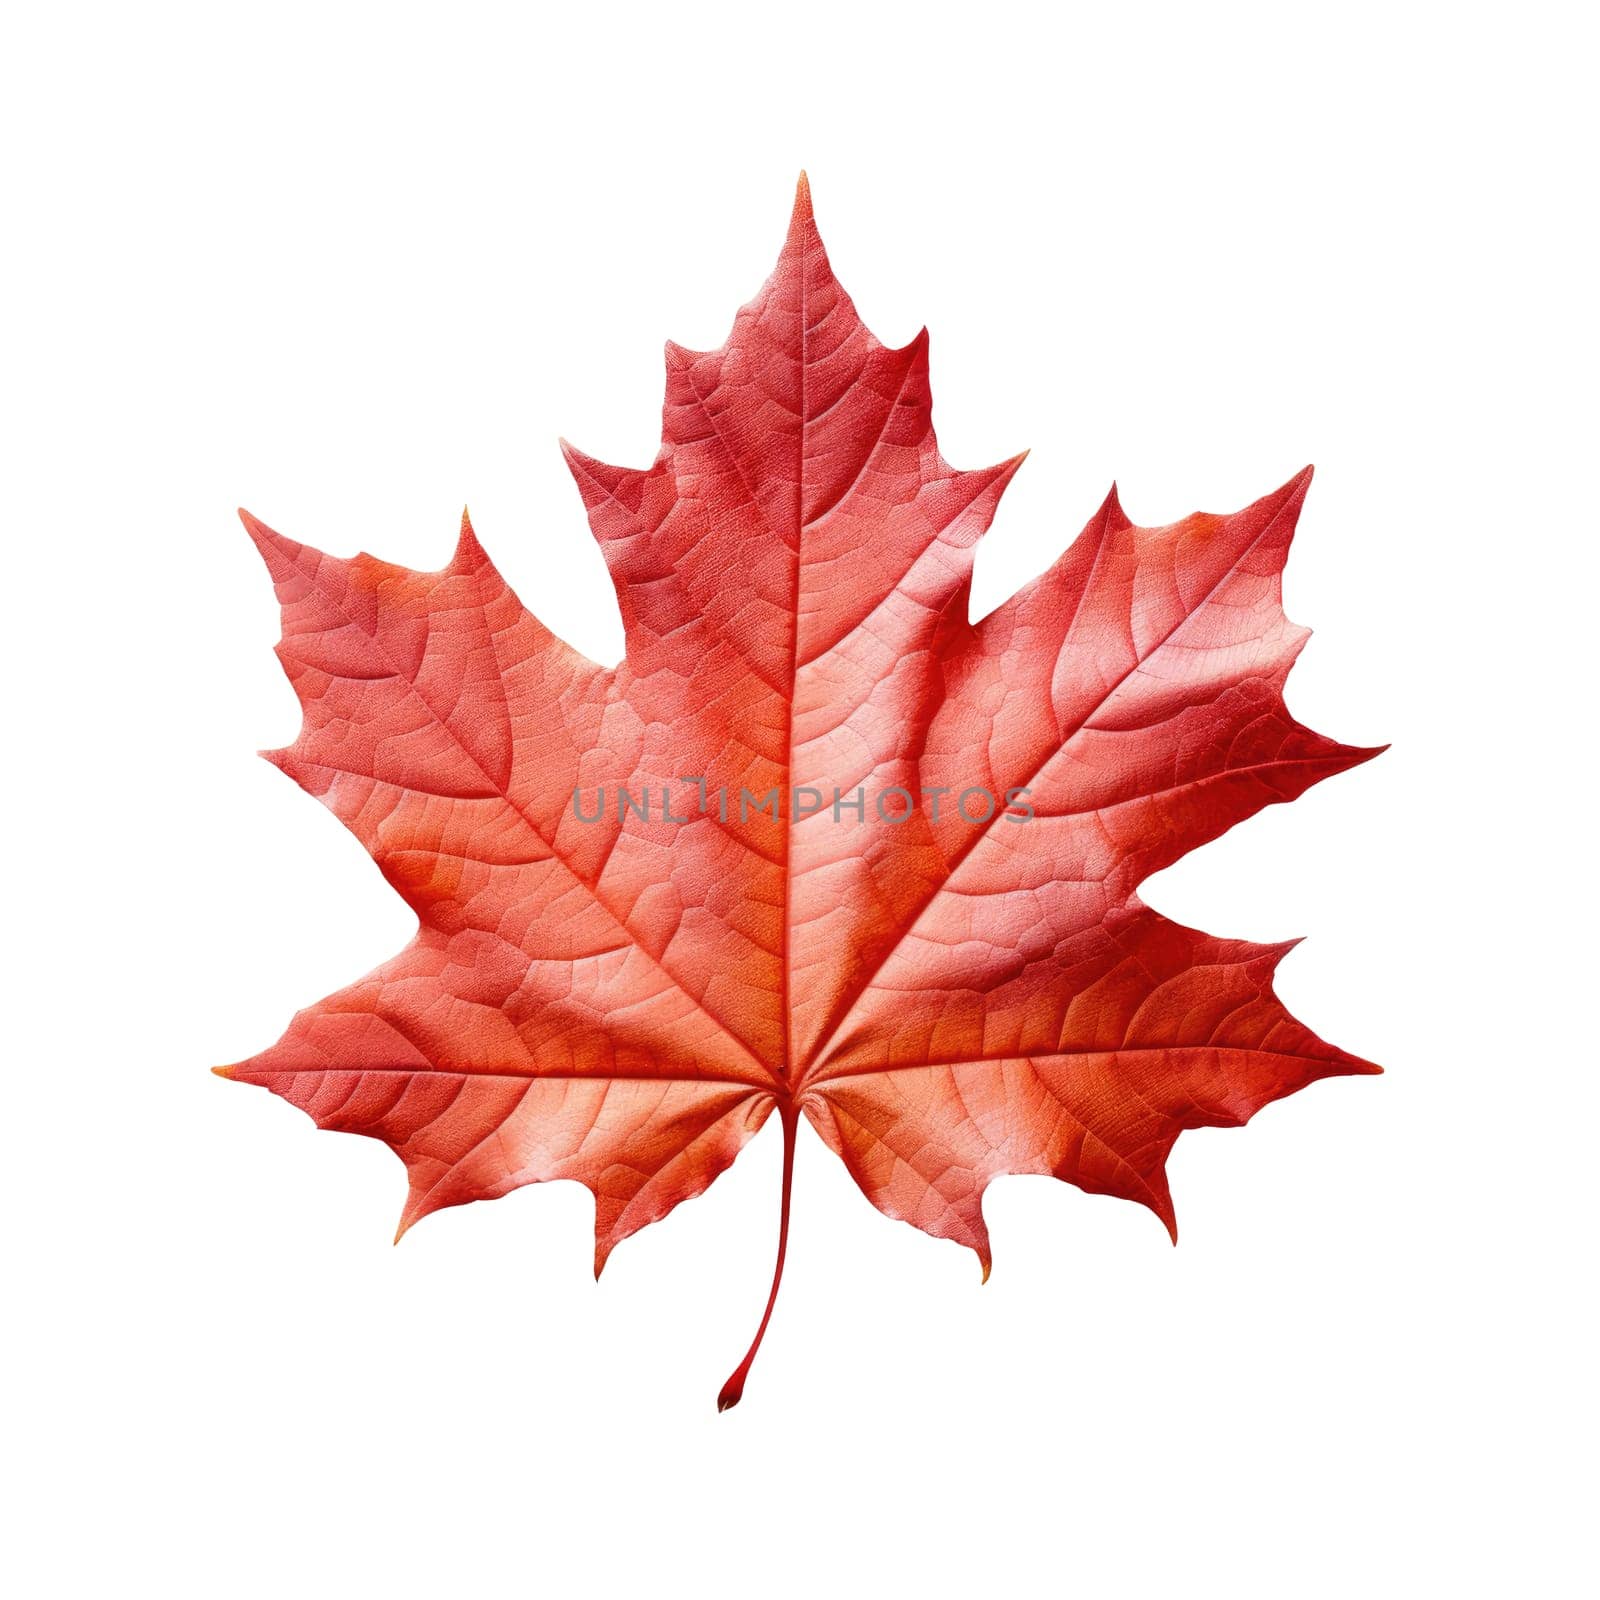 Red maple leaf as an autumn symbol as a seasonal themed concept by natali_brill